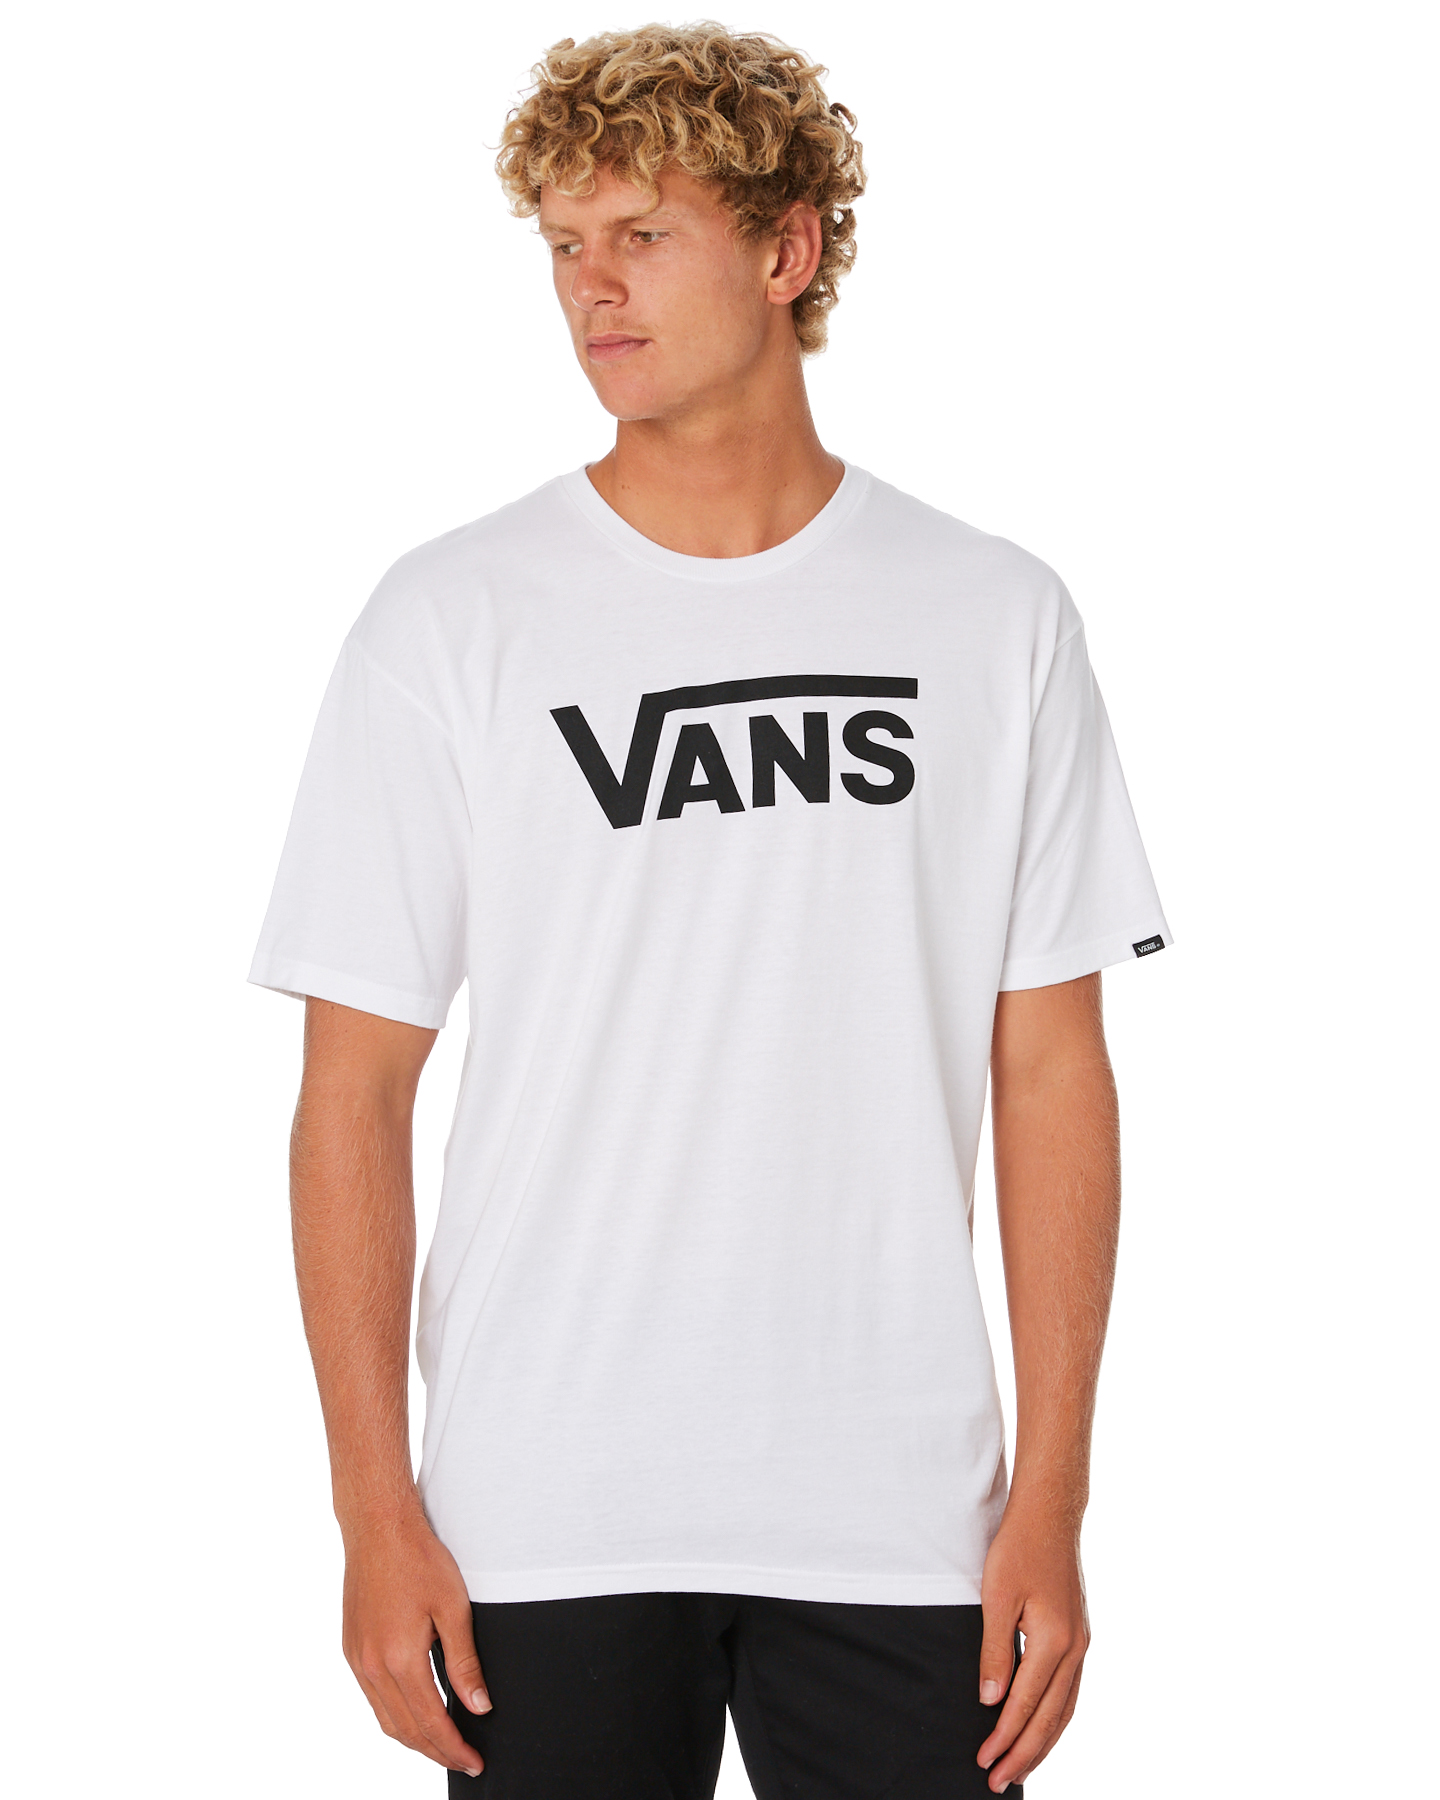 where can i buy vans clothing